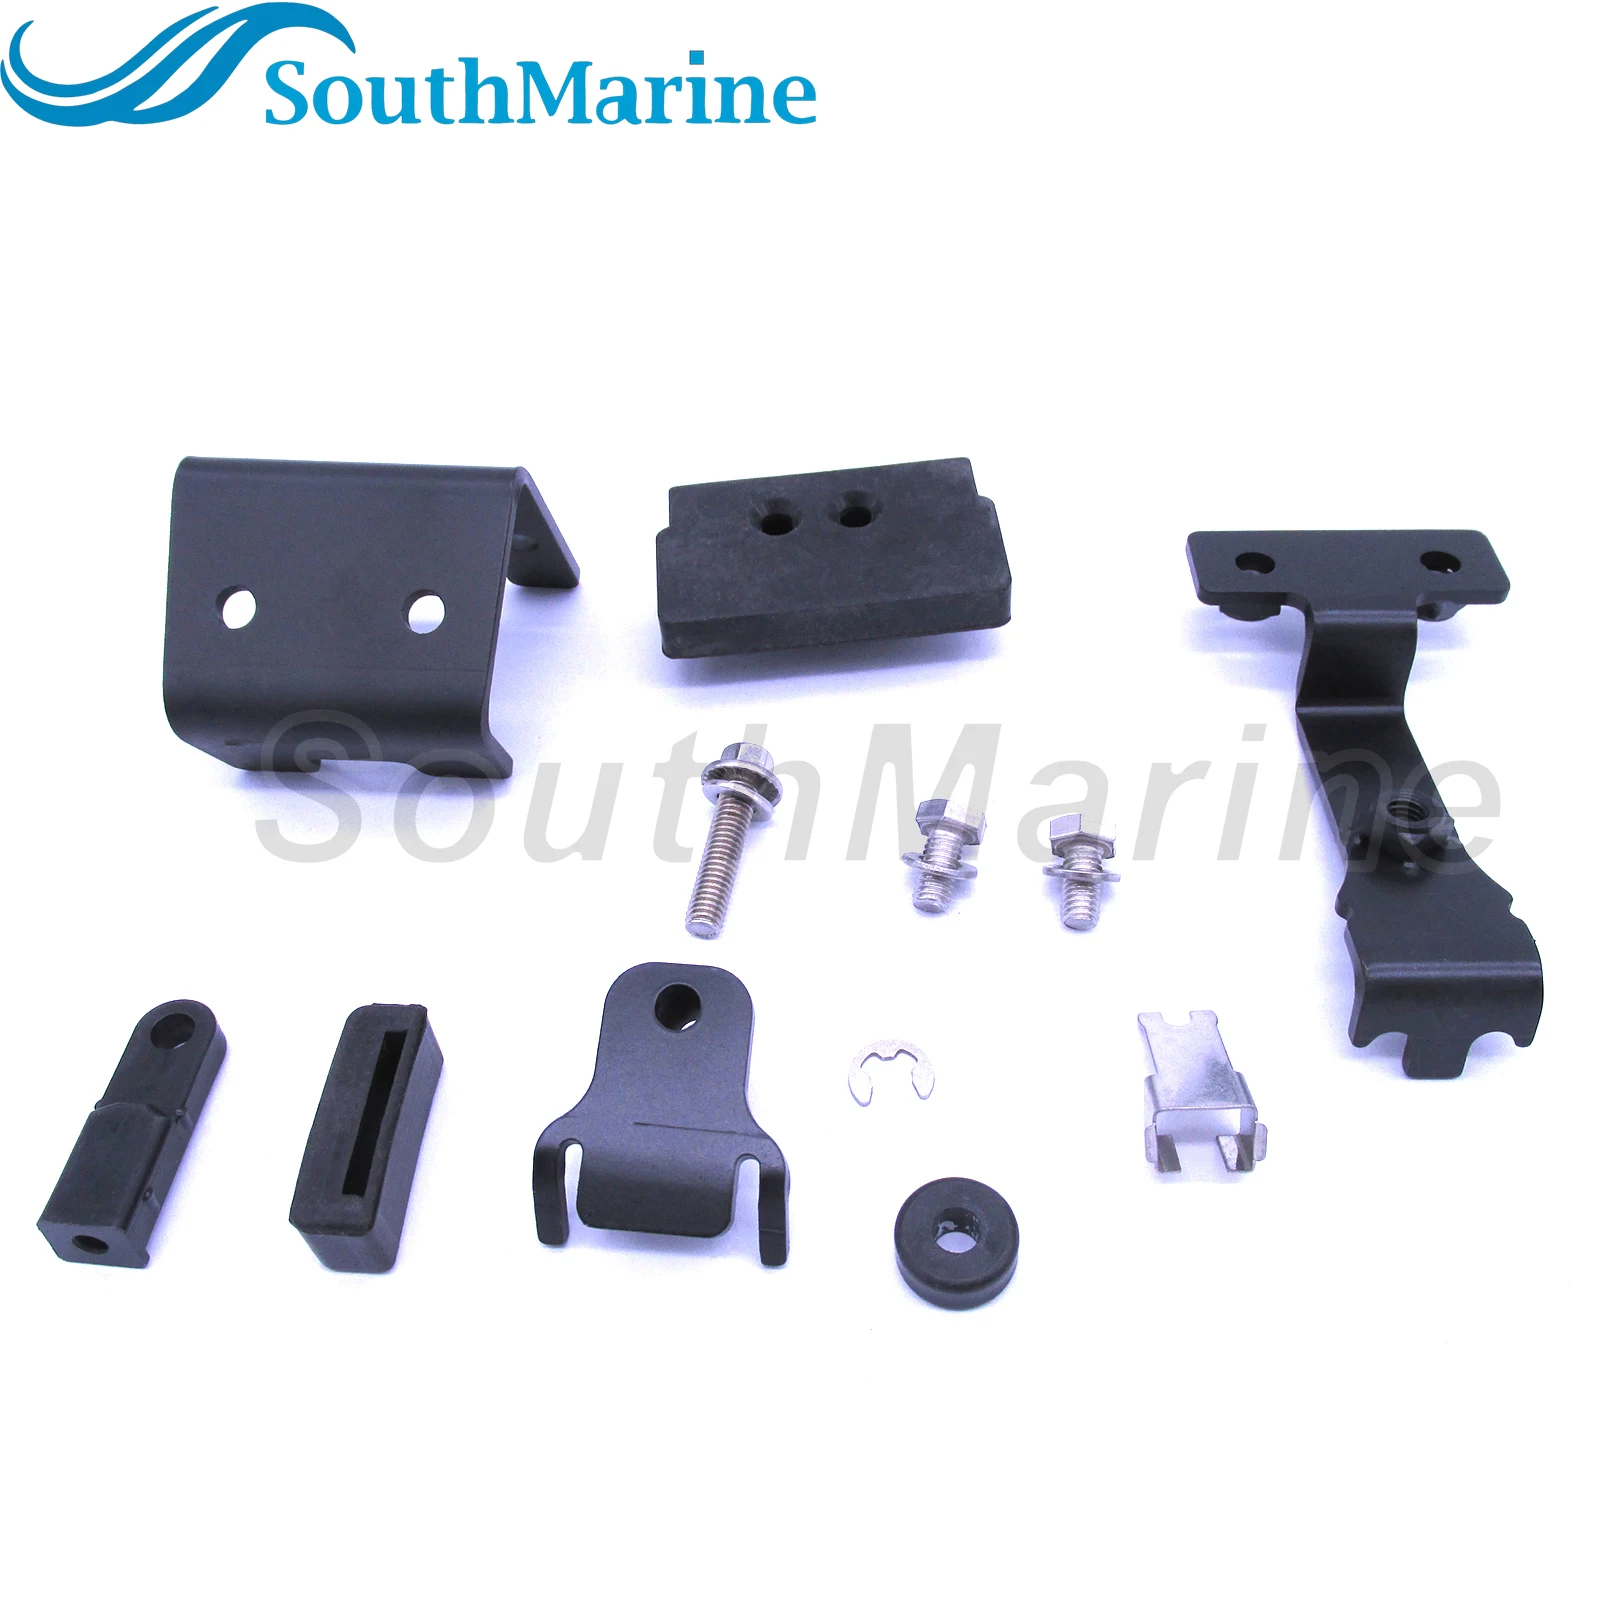 Boat Motor 6G8-48501-00 6G8-48501-01 6G8-48501-02 6G8-48501-03 Remote Control Attachment Assy for Yamaha Outboard Engine 9.9HP